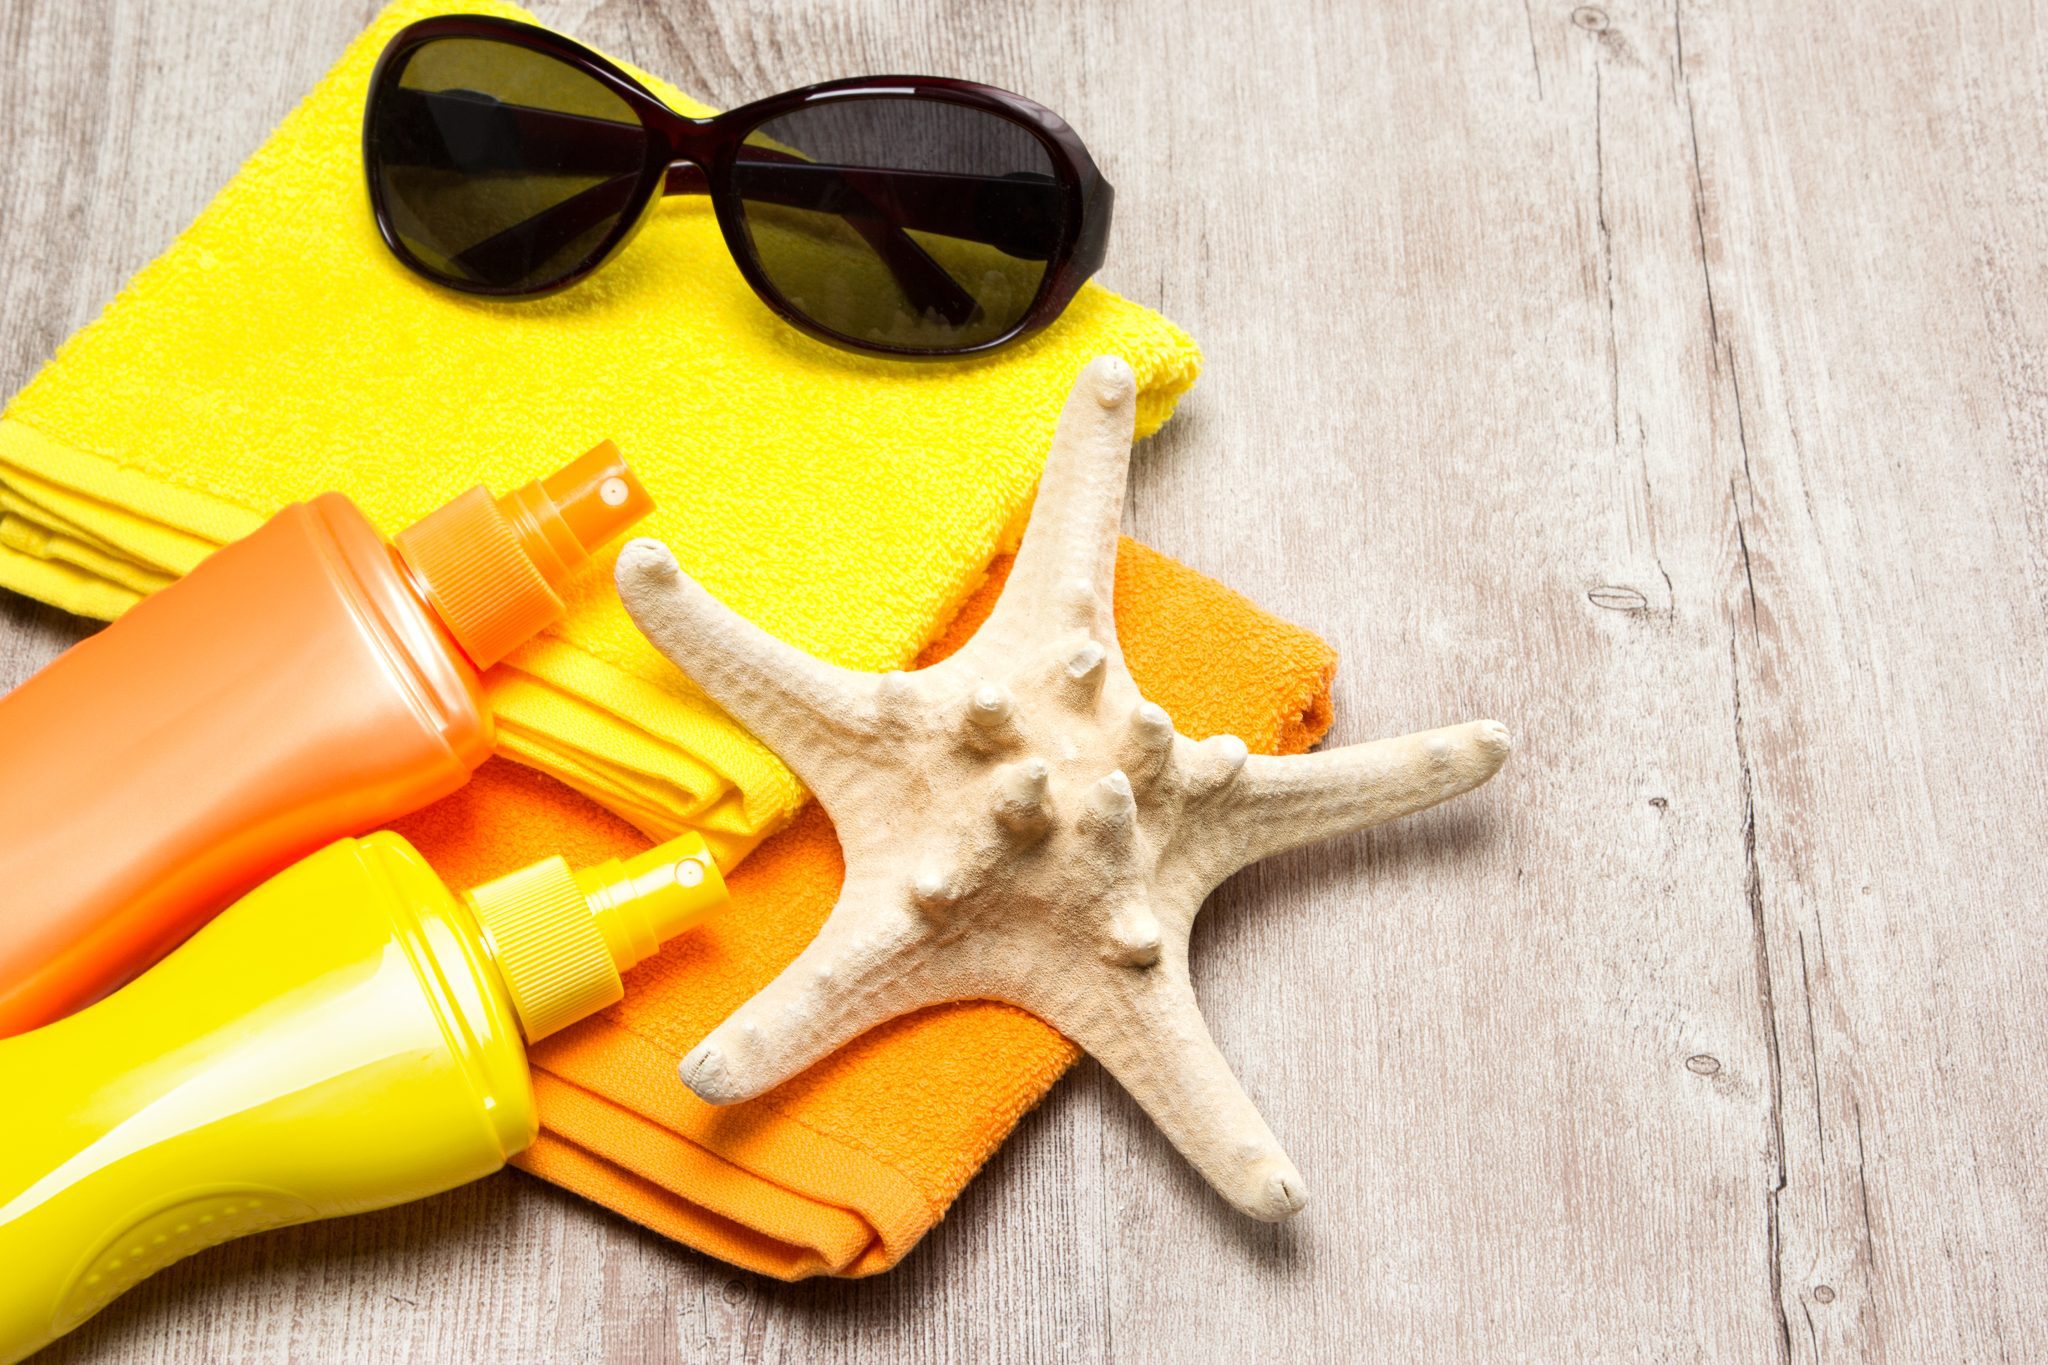 Beach towels with sunscreen, sunglasses, and a seashell.